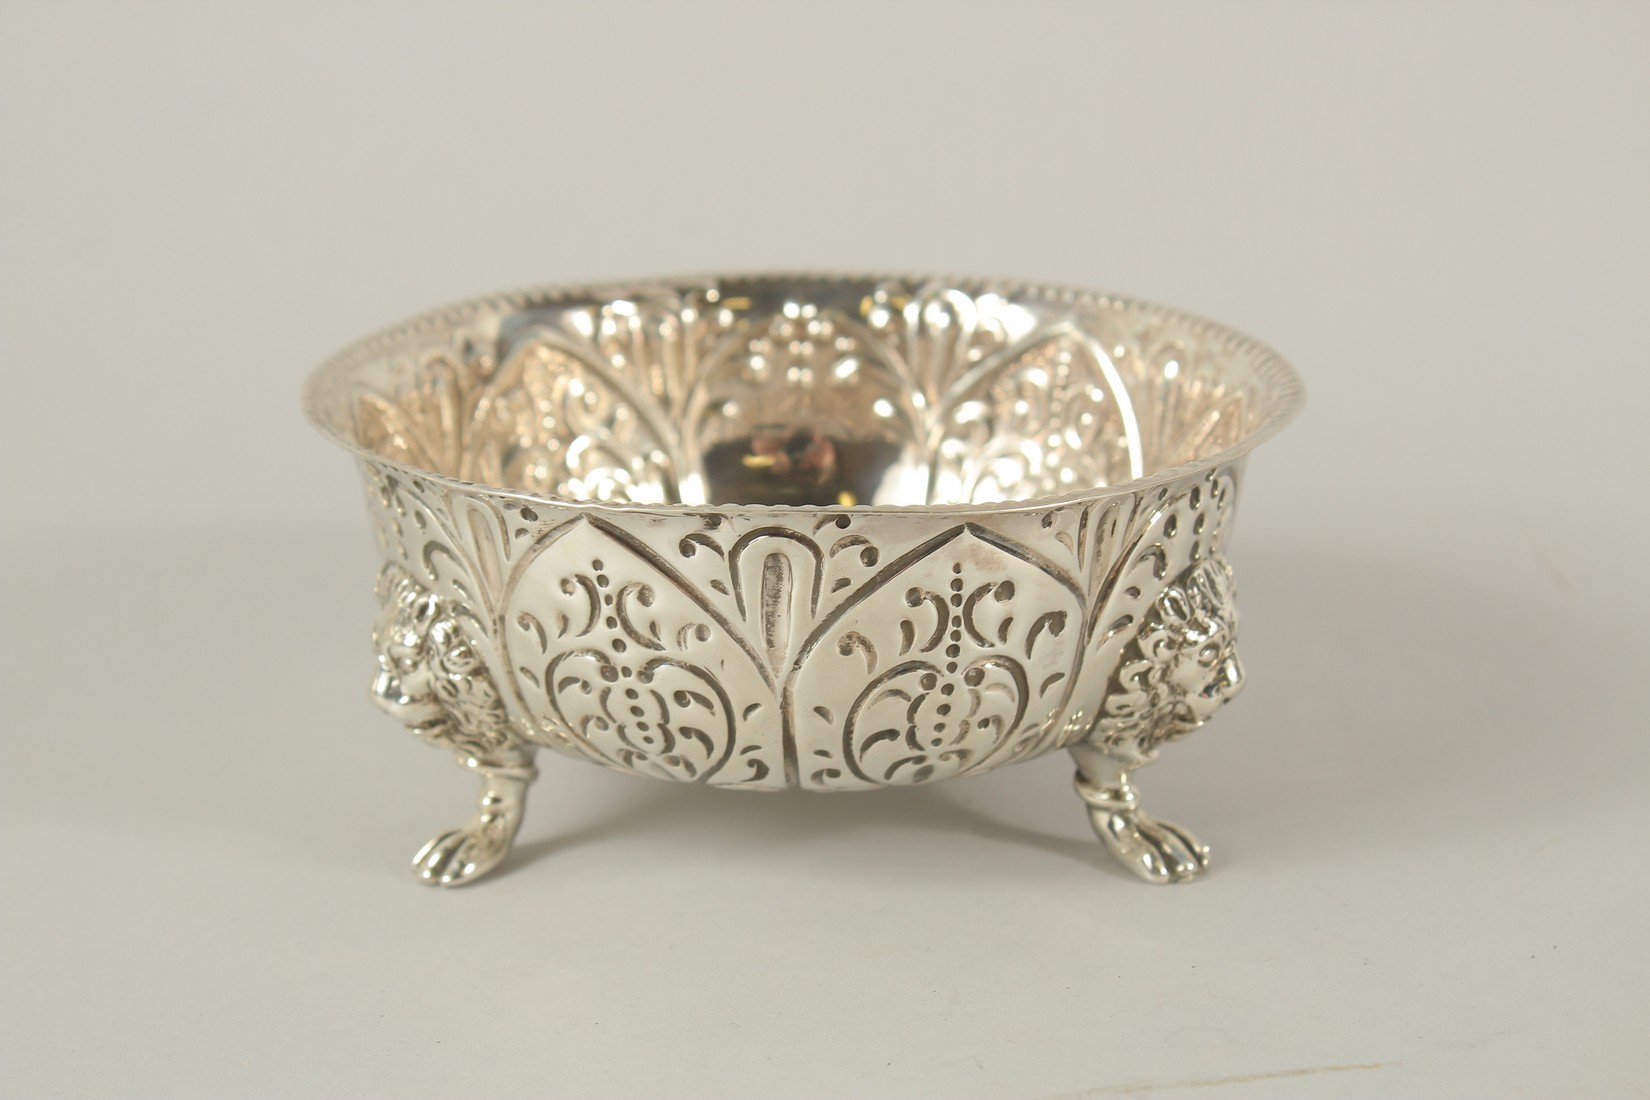 A VICTORIAN CIRCULAR SUGAR BOWL with repousse decoration. 5ins diameter. London 1891.